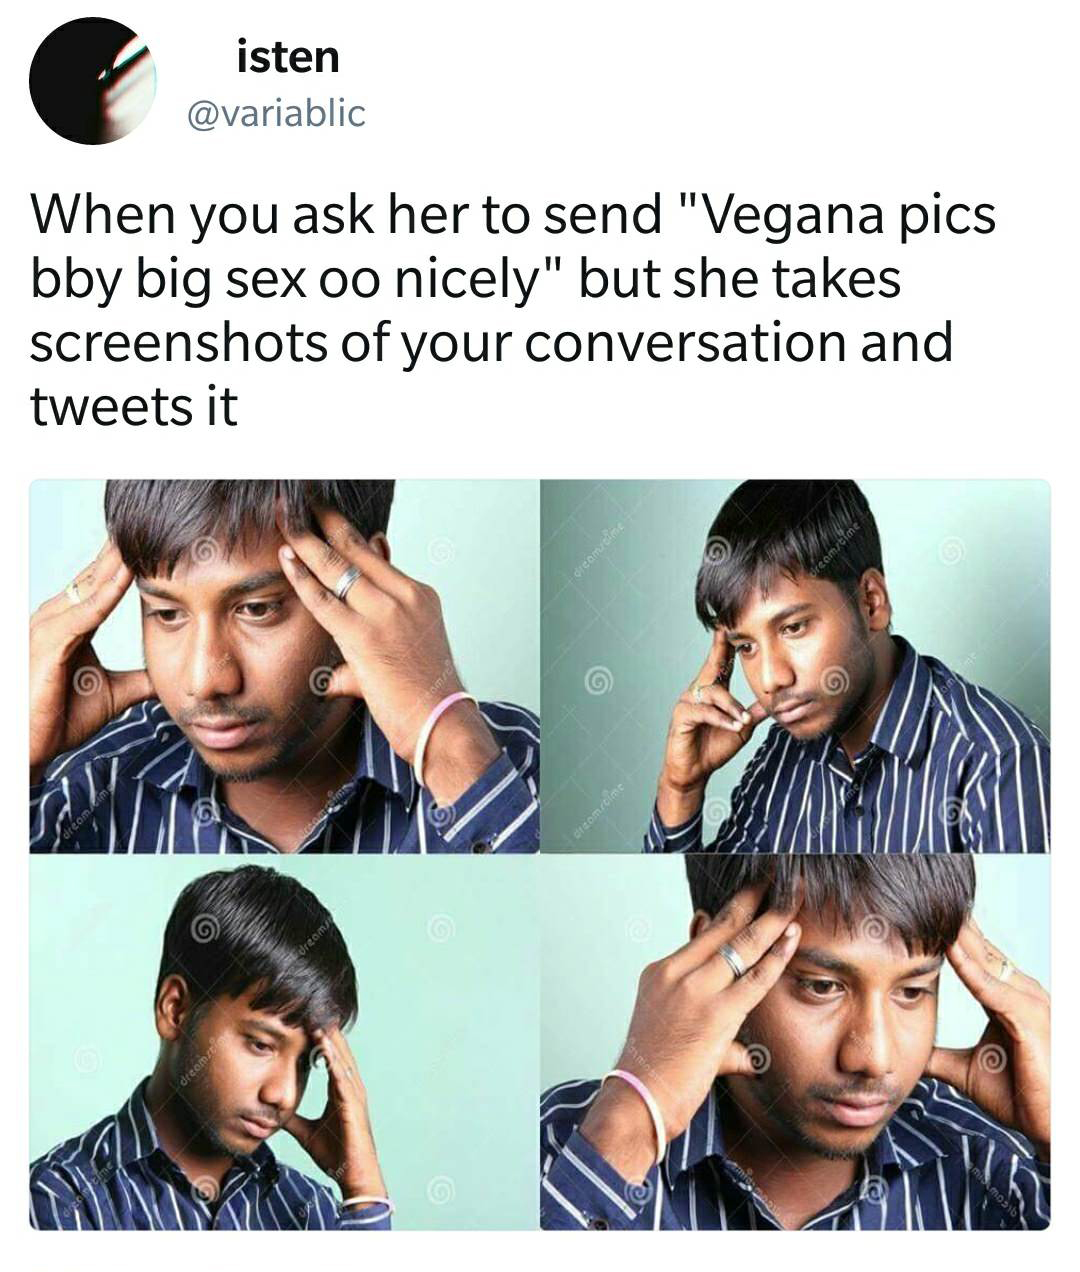 send bobs and vegana - isten When you ask her to send "Vegana pics bby big sex oo nicely" but she takes screenshots of your conversation and tweets it